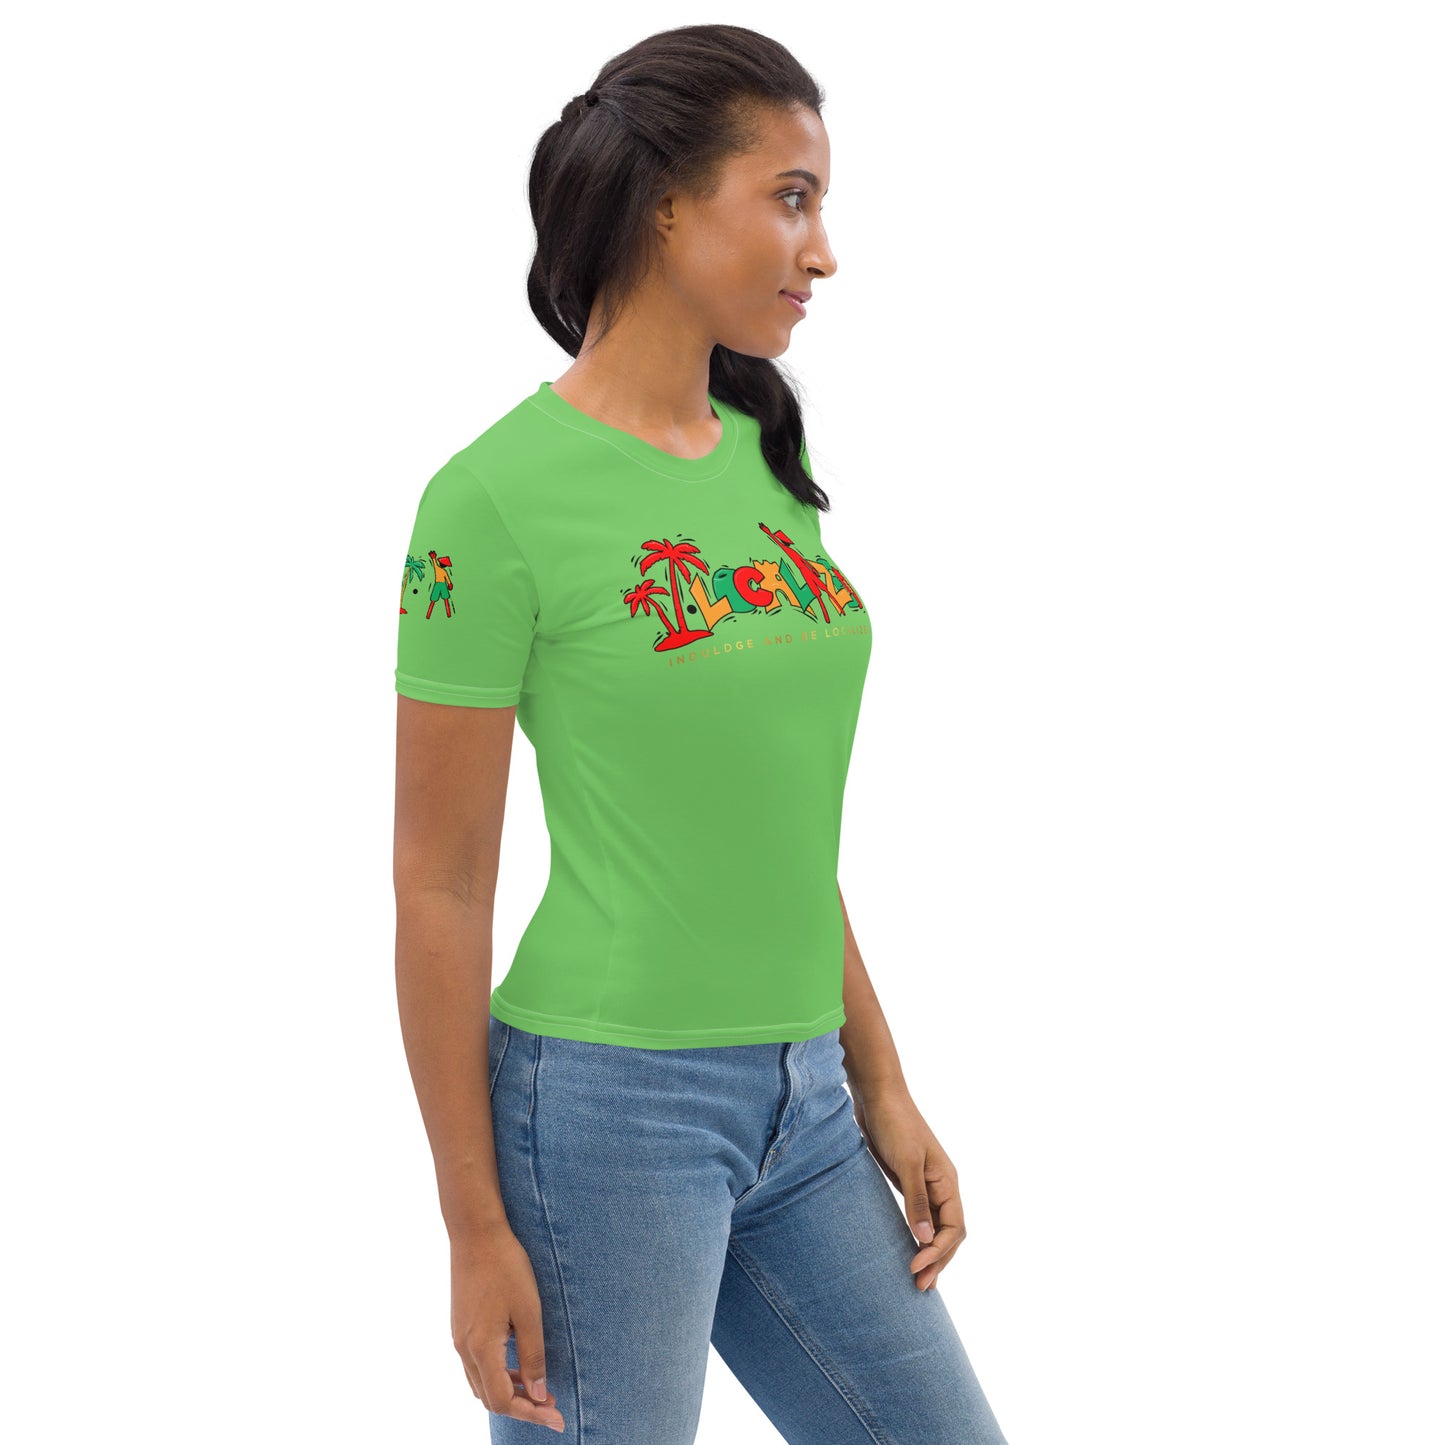 Green V.Localized (Ice/Gold/Green) Women's Dry-Fit T-Shirt